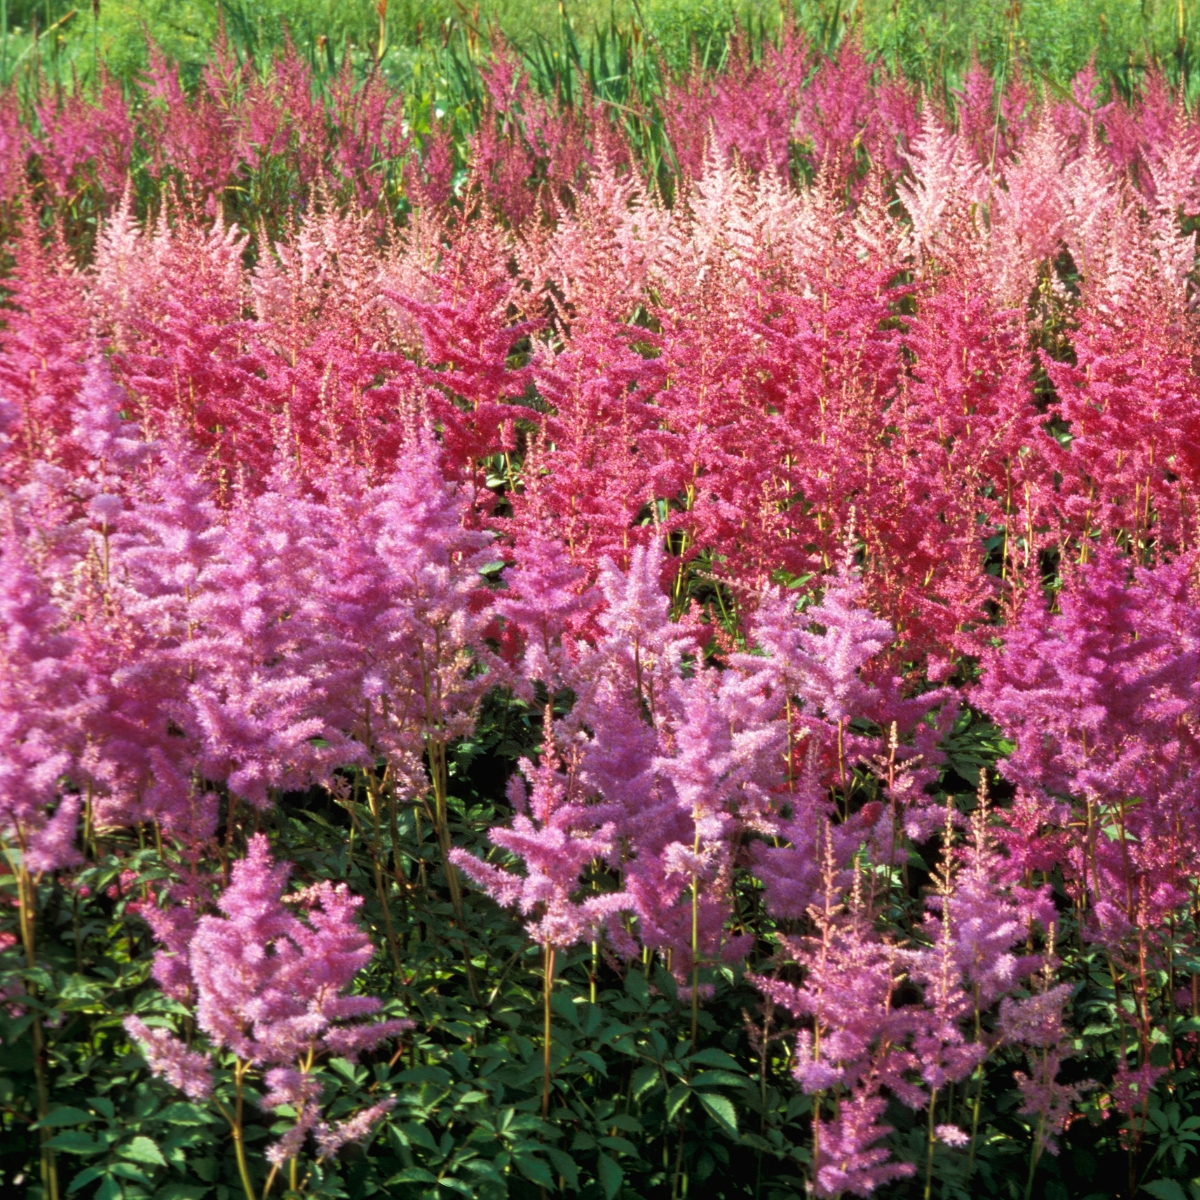 various shades of pink astilbe growing in a field